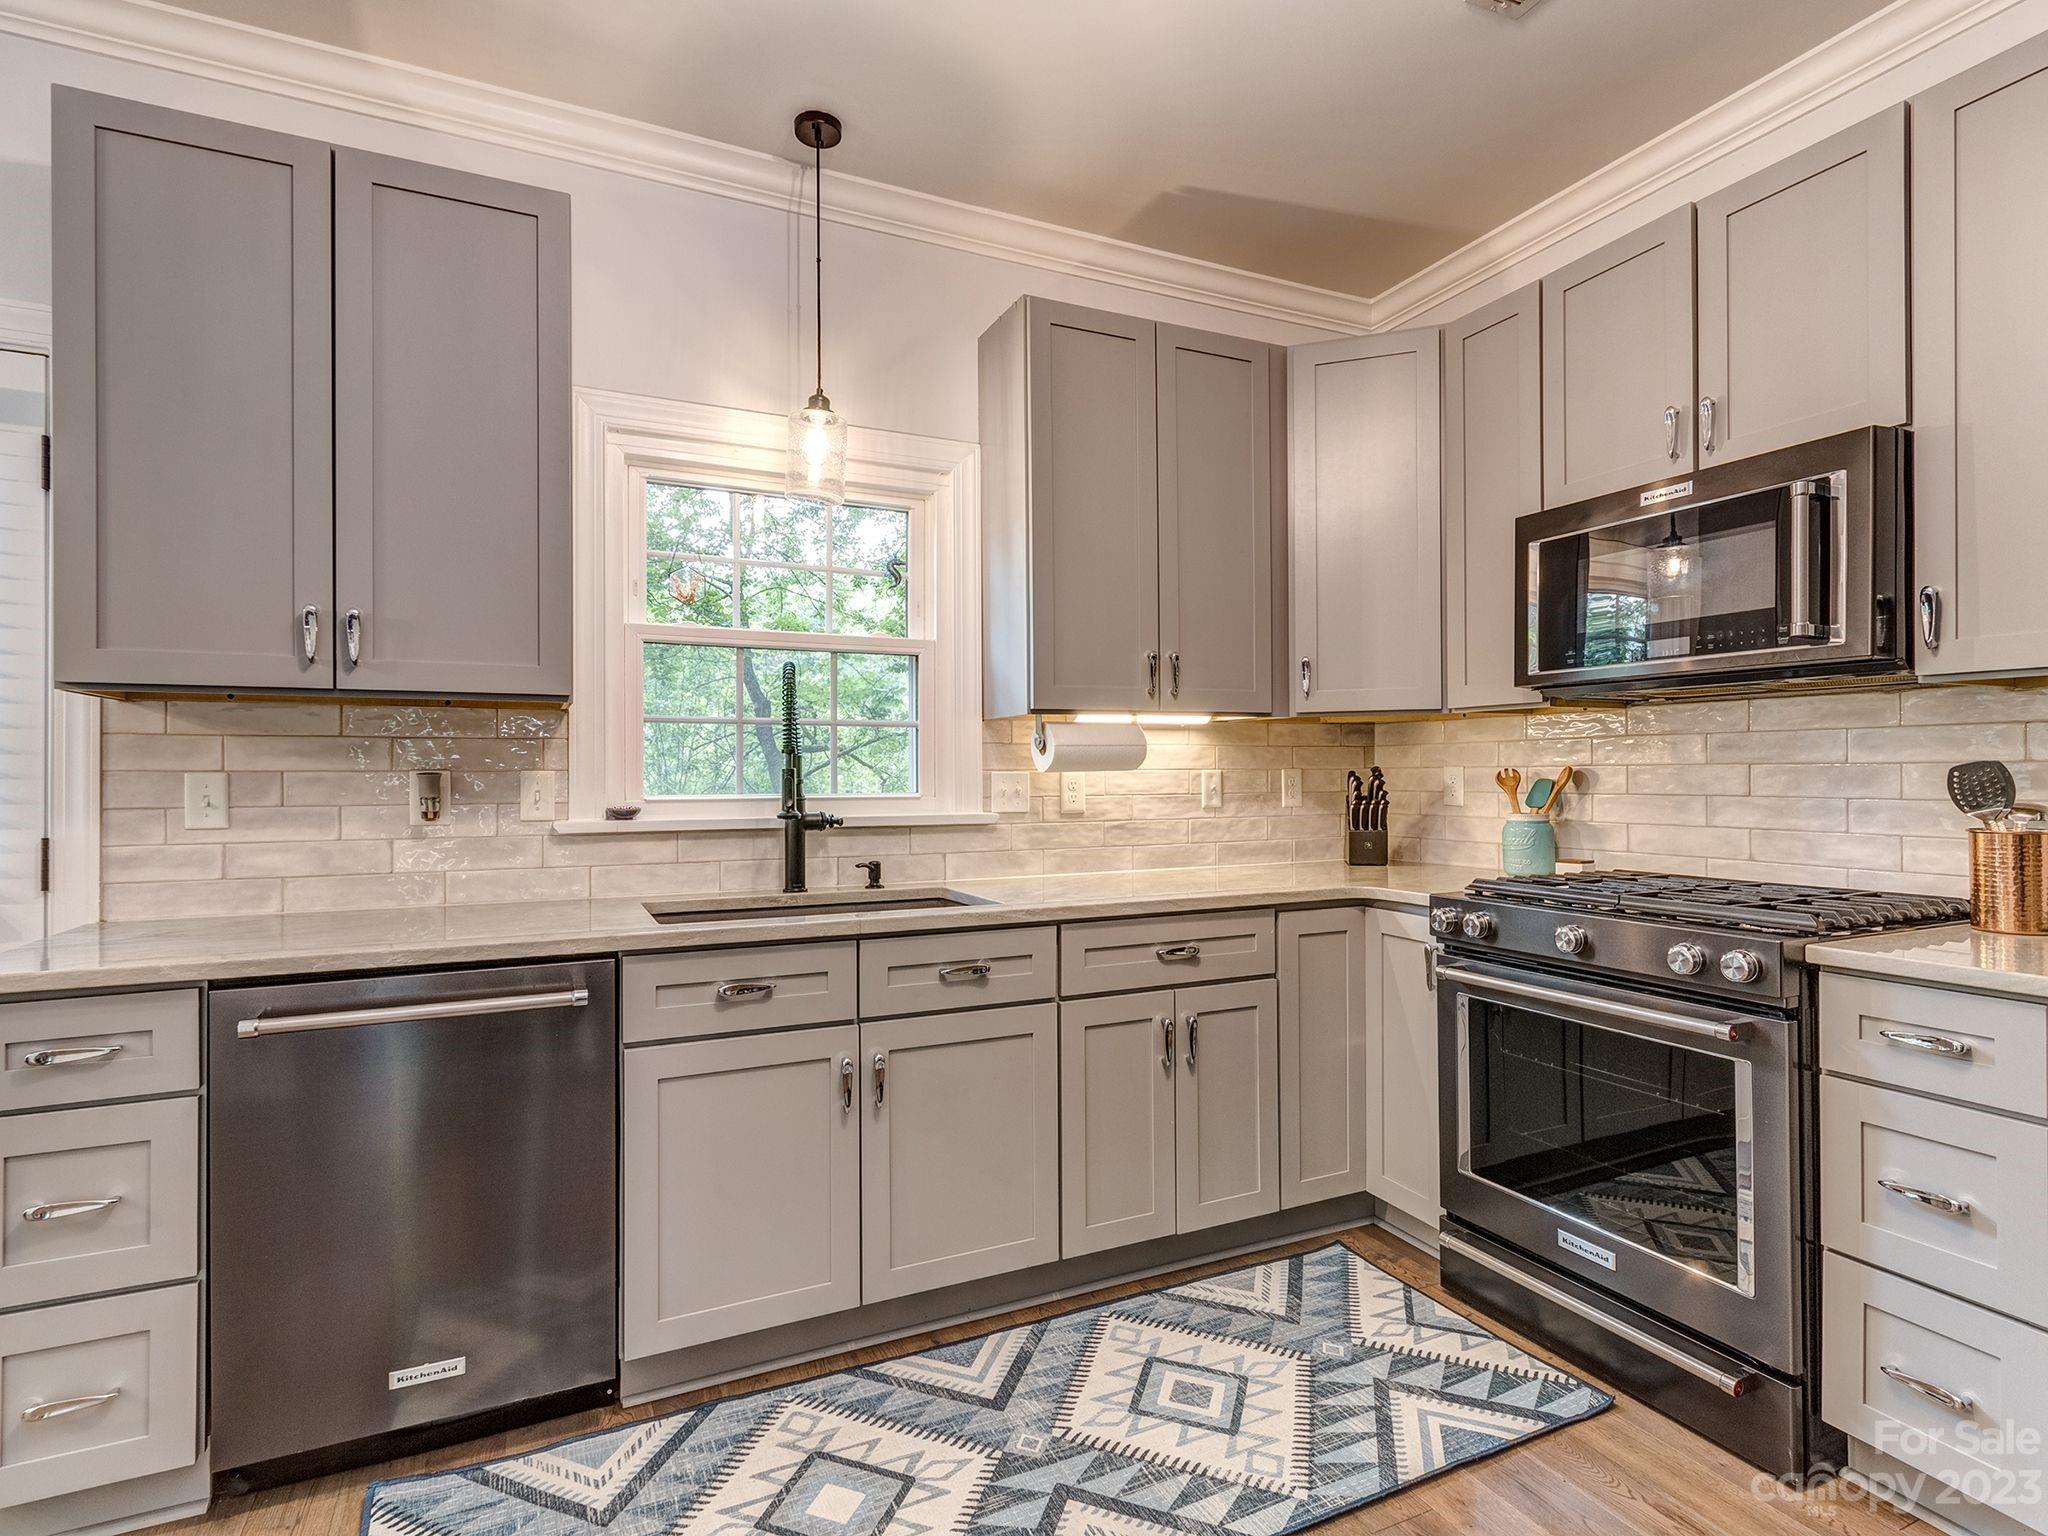 a kitchen with granite countertop a stove sink and microwave